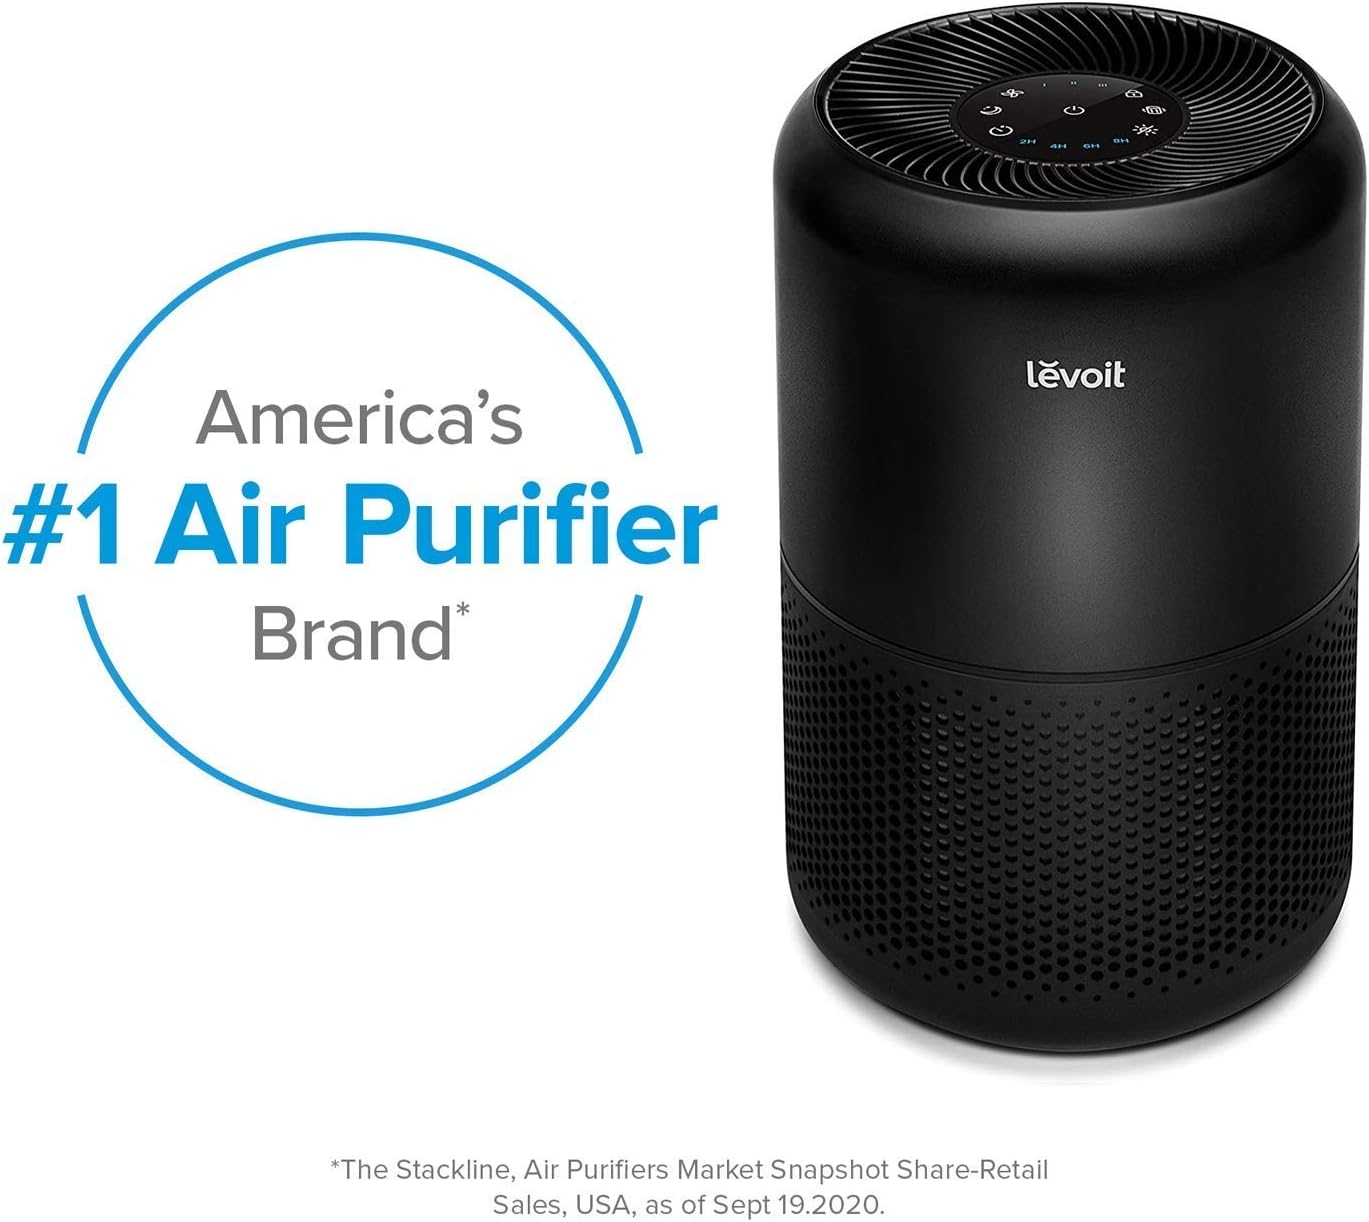 LEVOIT Air Purifier for Home Allergies and Pets Hair Smokers in Bedroom, H13 True HEPA Filter, 24db Filtration System Cleaner Odor Eliminators, Remove 99.97% Dust Smoke Mold Pollen, Core 300, Black